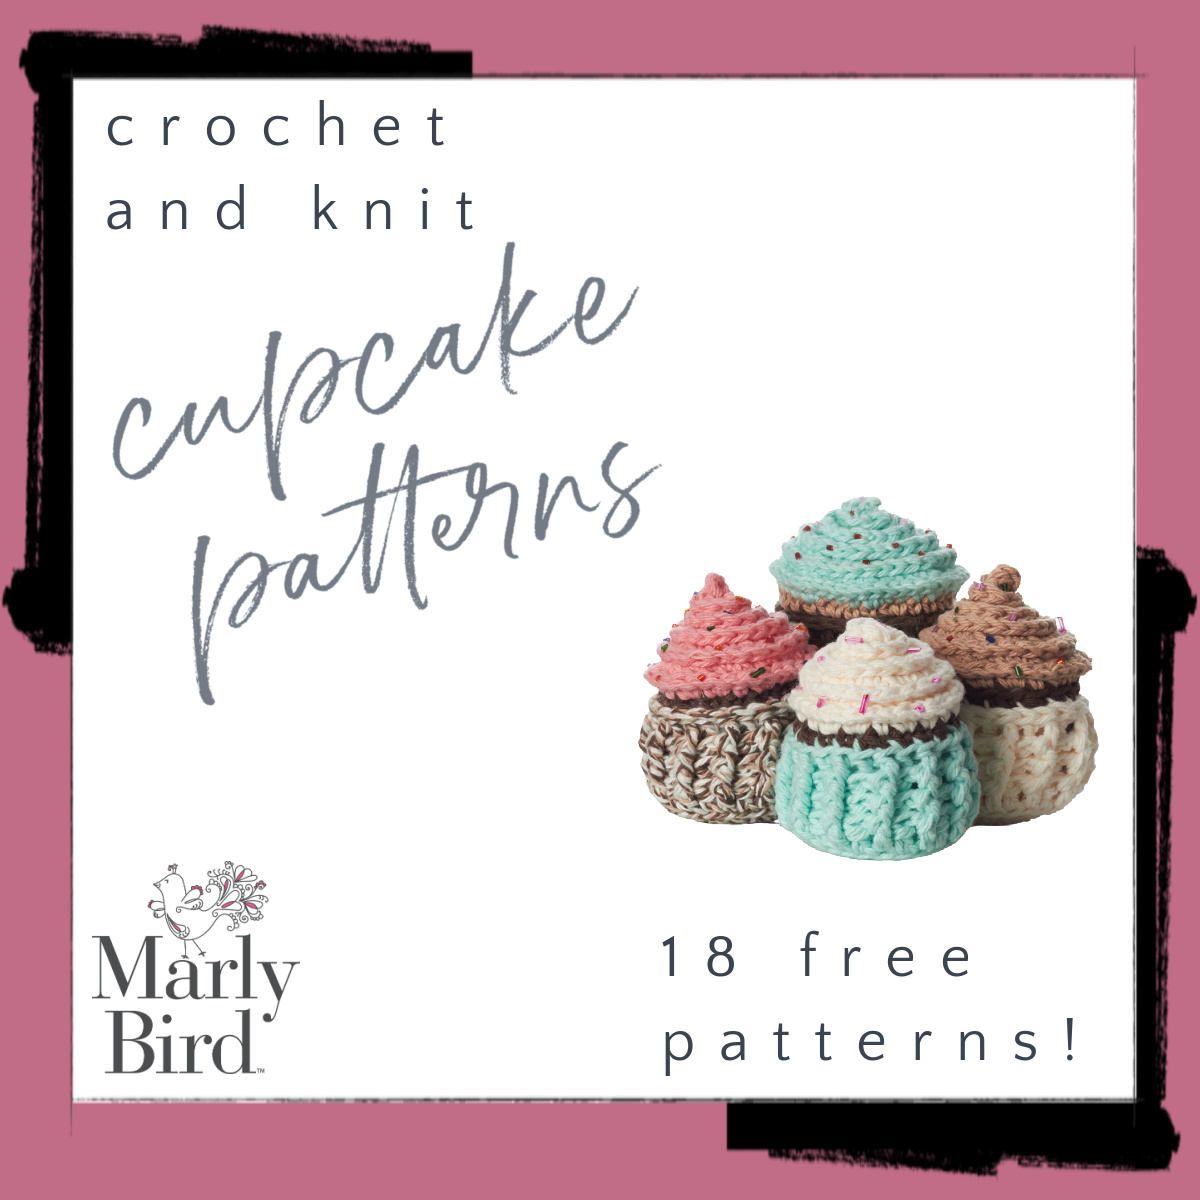 18 Free Crochet Patterns to Knit and Crochet